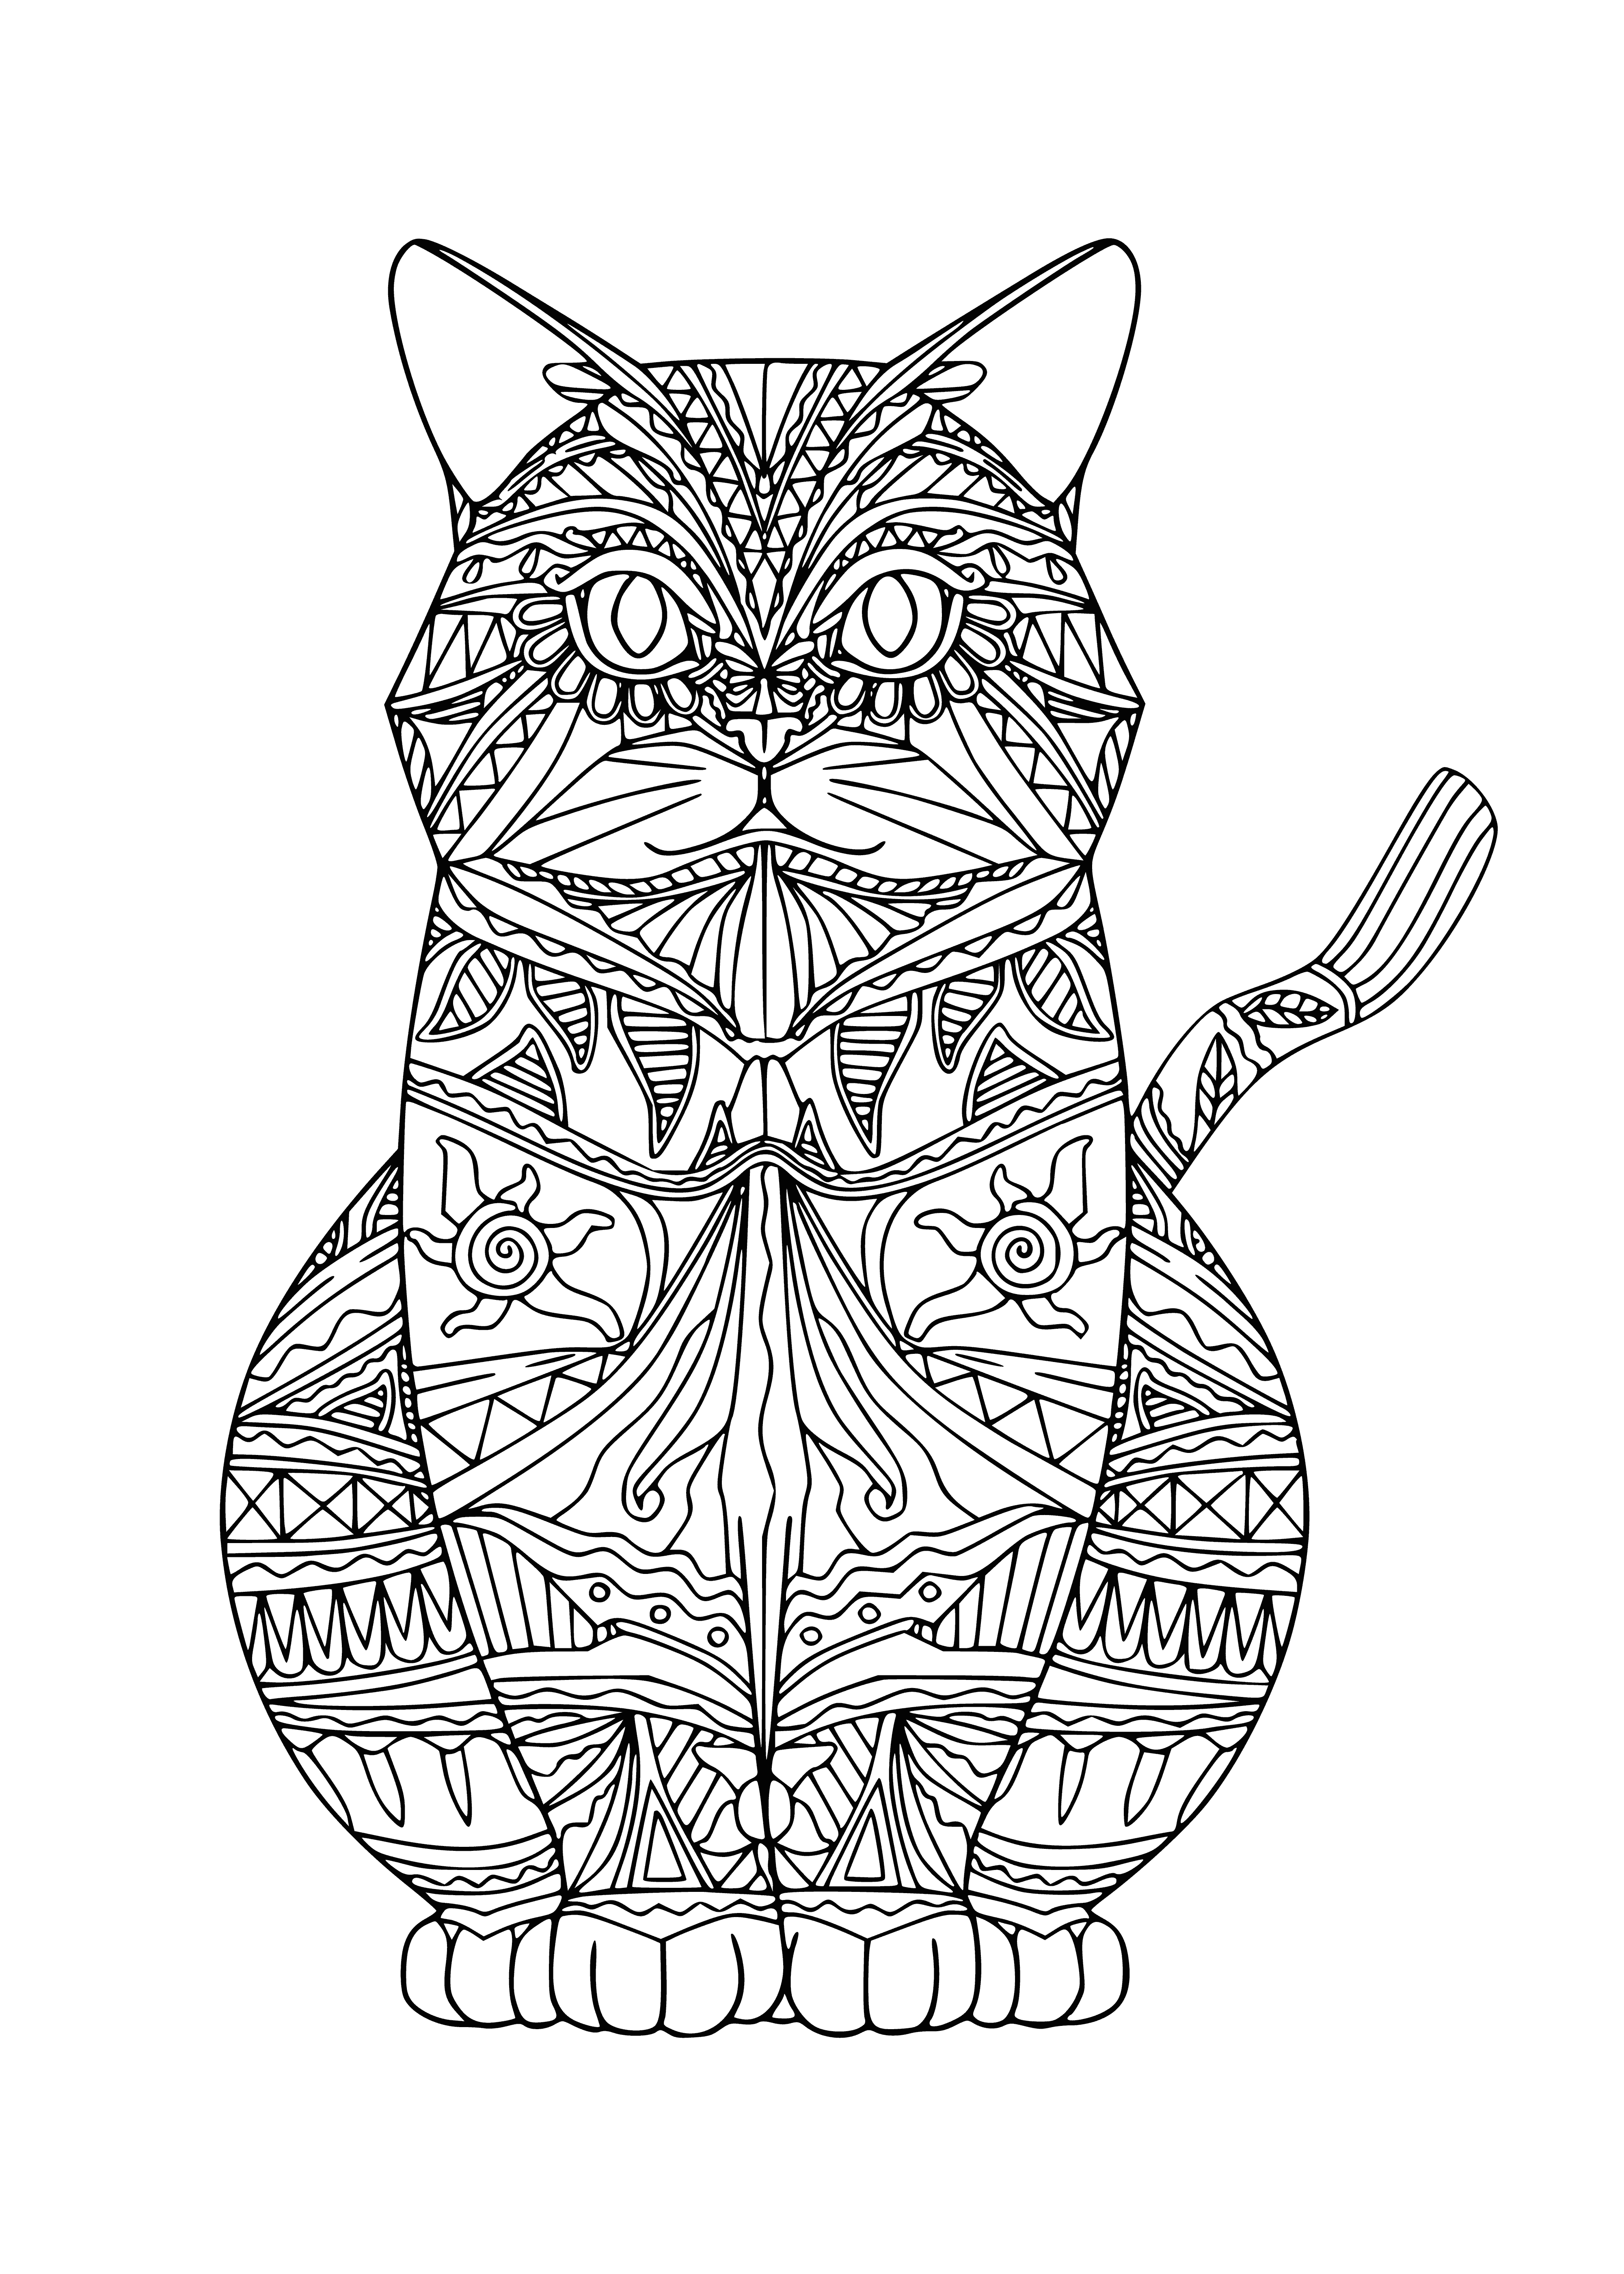 coloring page: Kitty is peacefully curled up, white w/light brown patches, eyes closed, resting head on paw. #CatsInTheirNaturalState